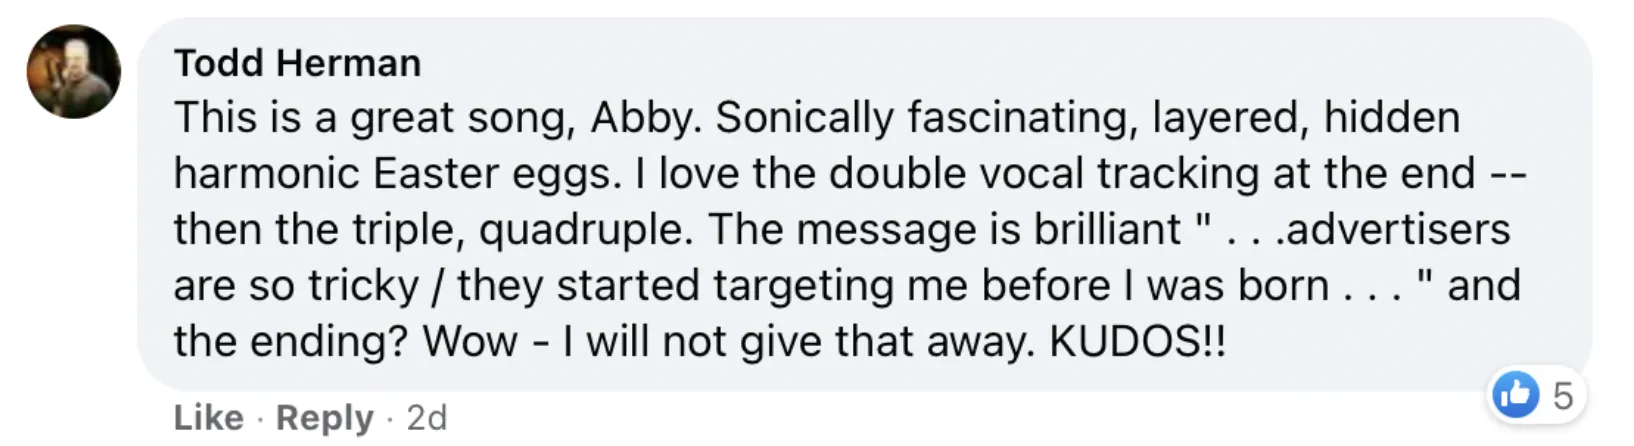 Screenshot of a social media comment by Todd Herman, expressing his admiration for Abby London's song, highlighting the impactful nature of her musical choices and her message